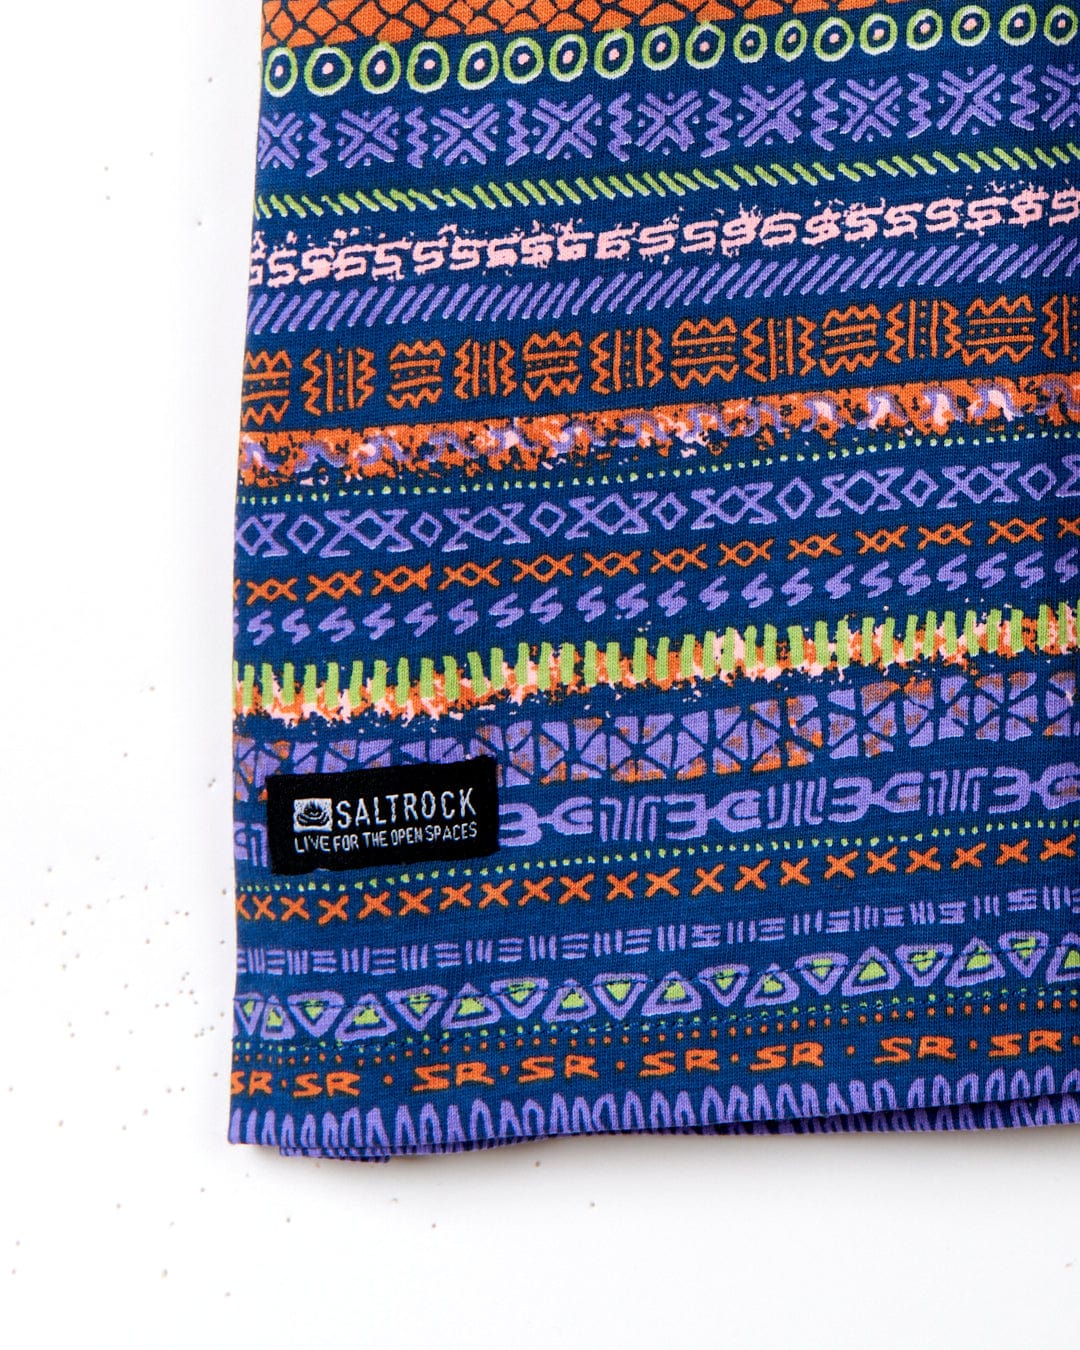 A colorful bag with an Aztec print and Saltrock branding on it.